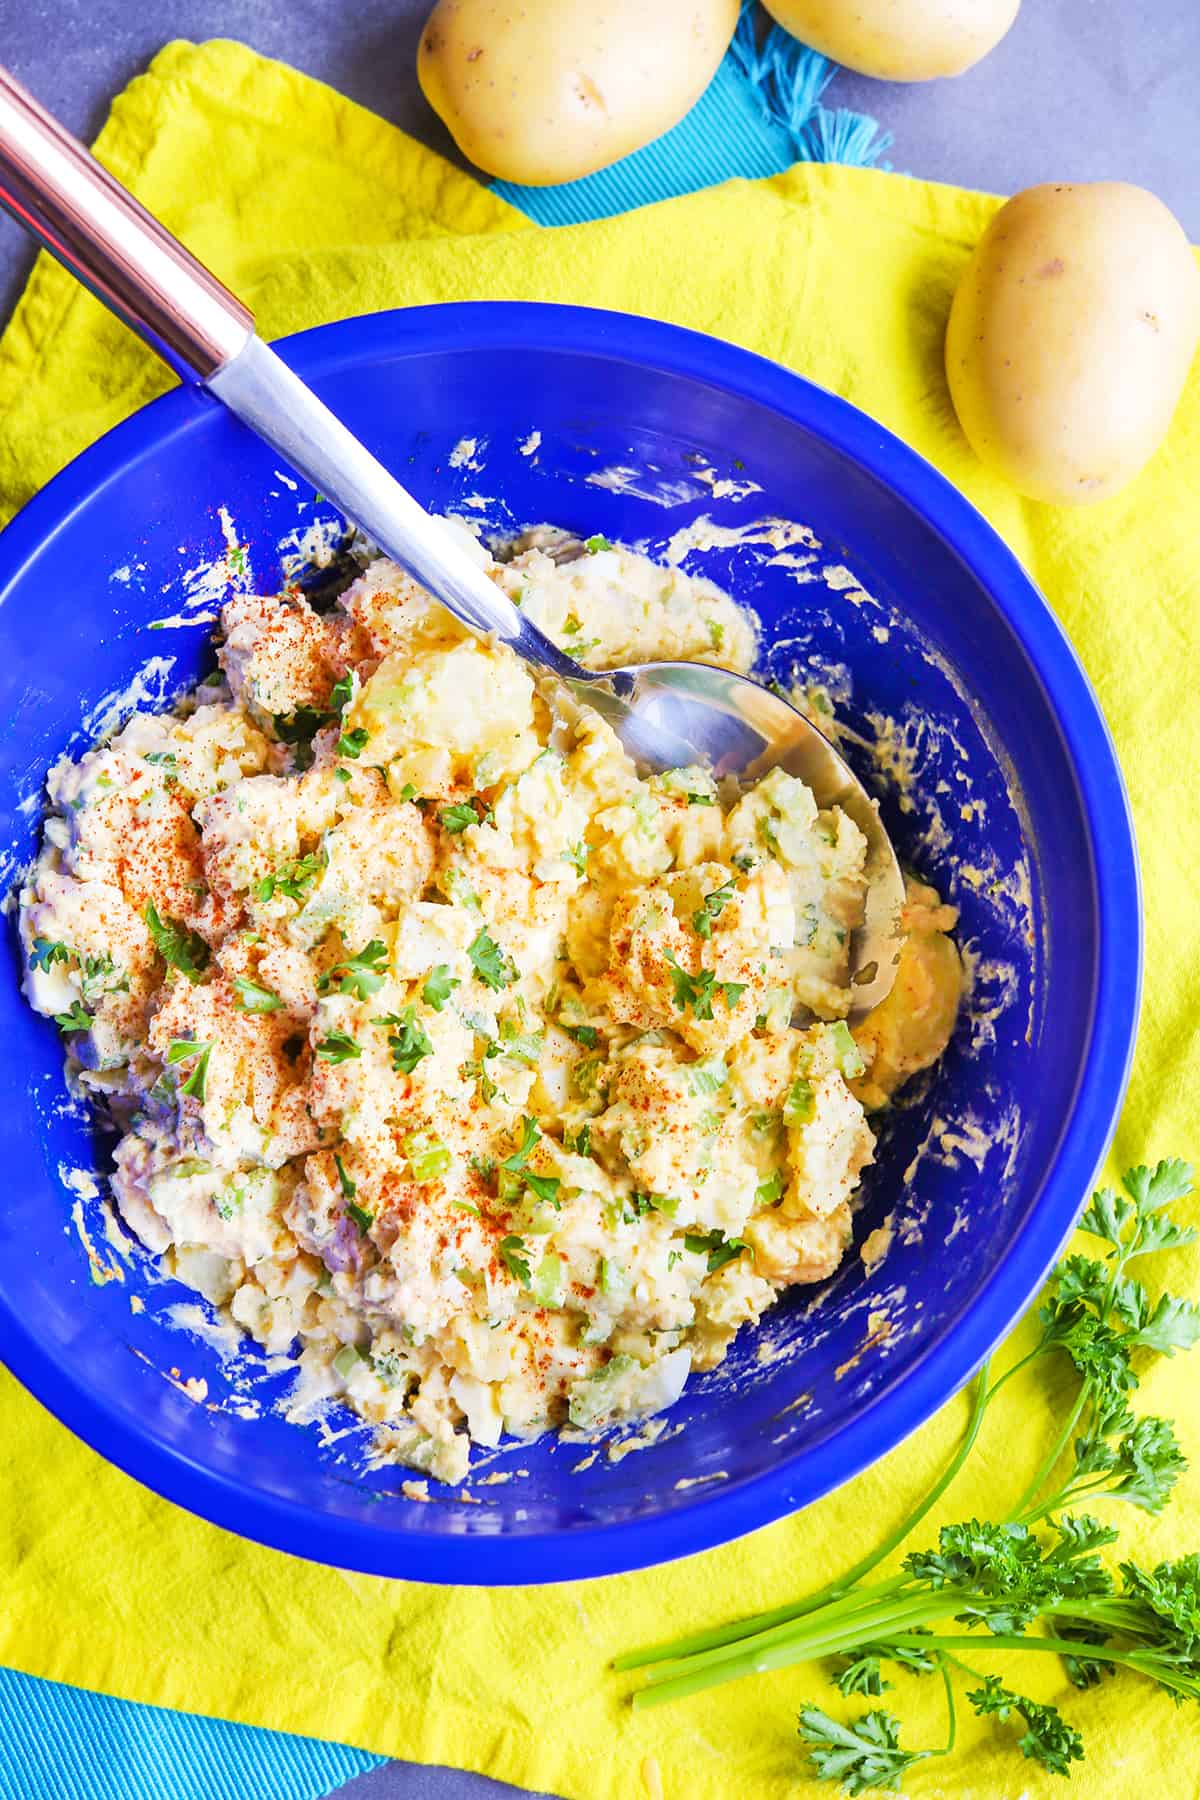 Blue mixing bowl filled with potato salad.